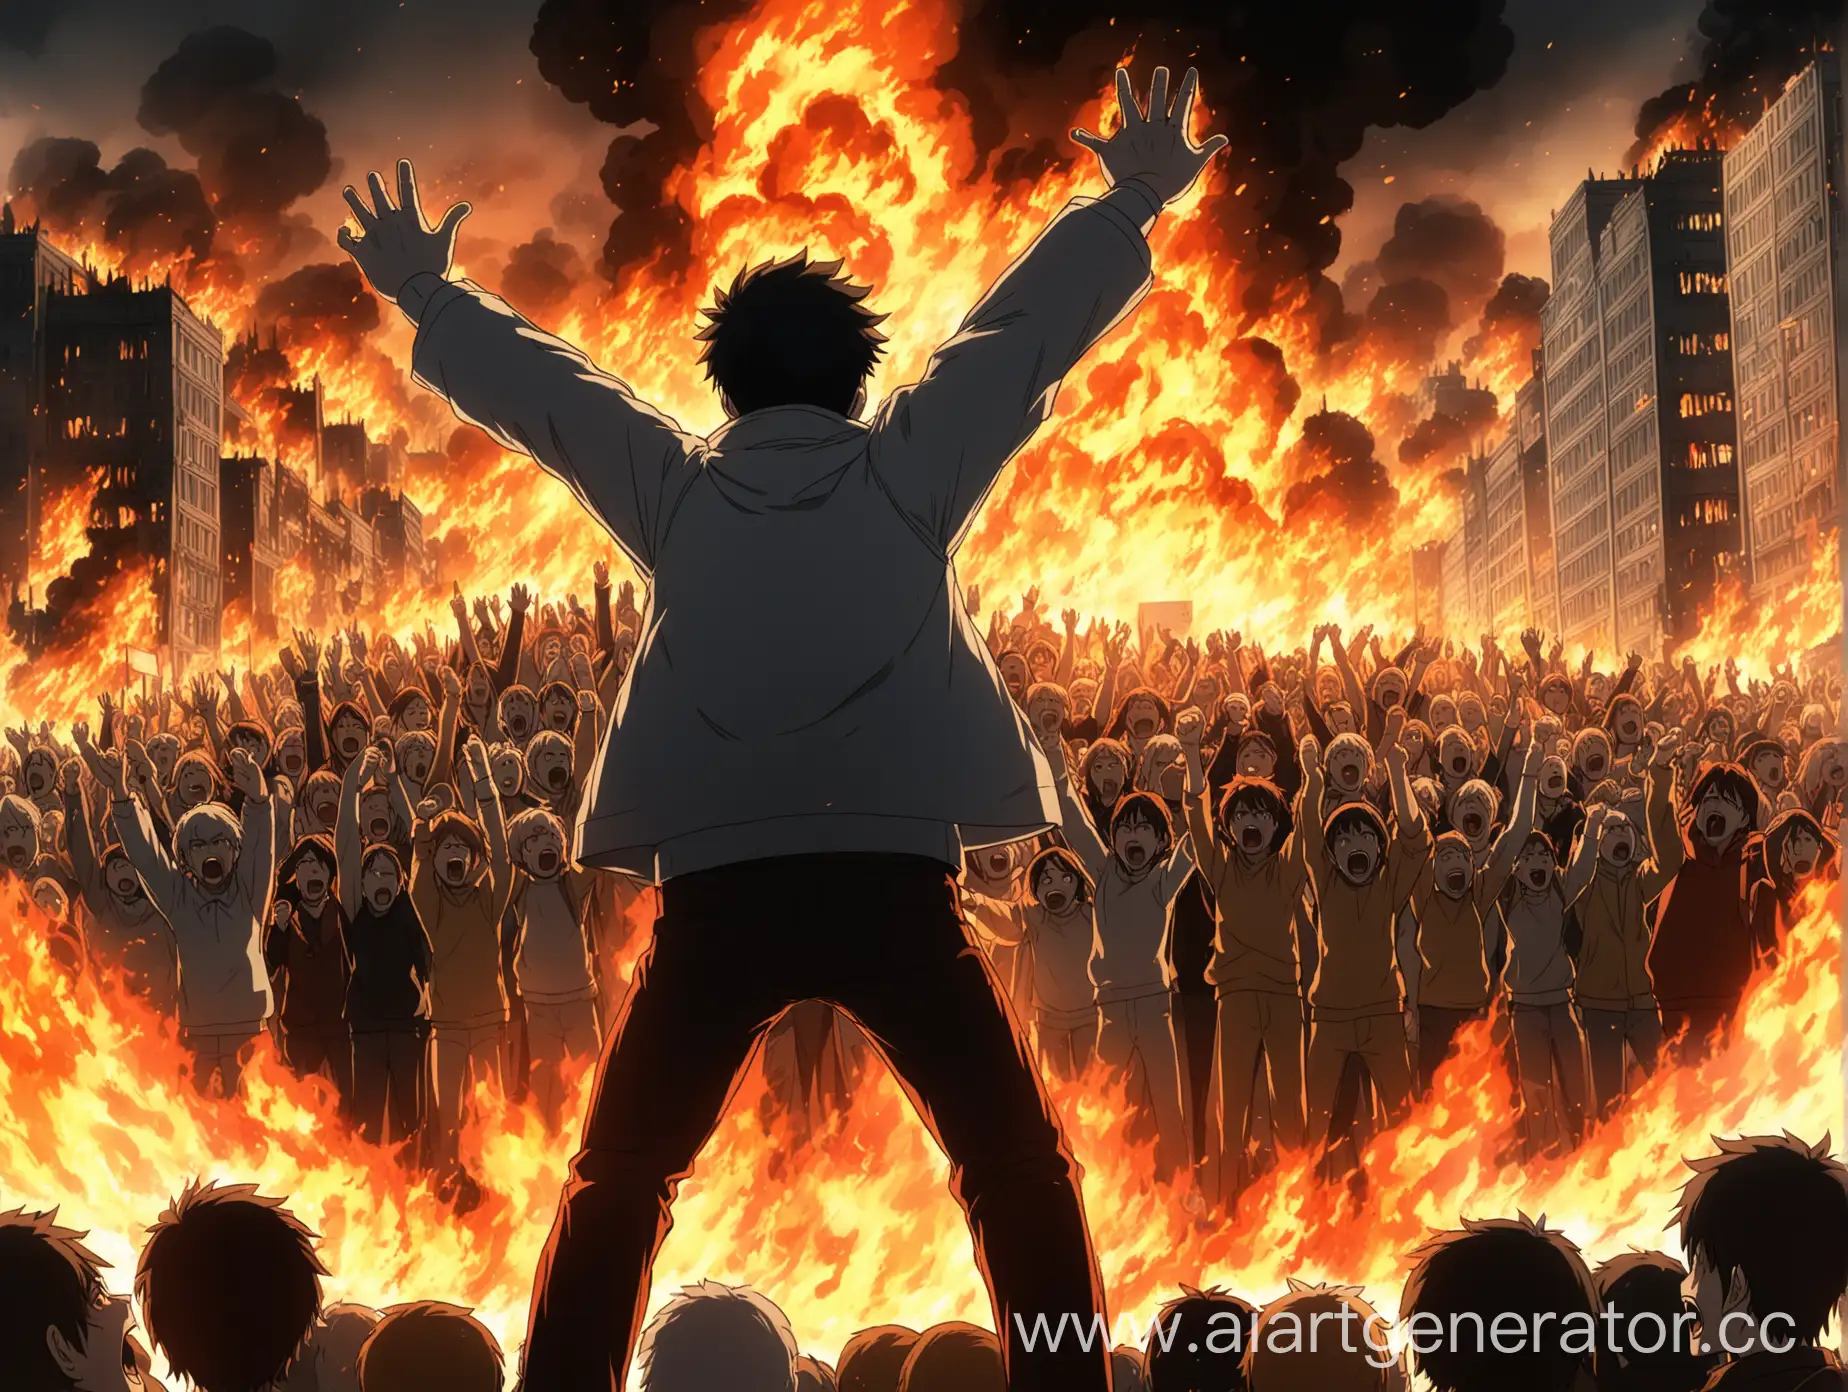 Anime-Character-Man-Shouting-Stop-Amidst-Crowd-in-Burning-City